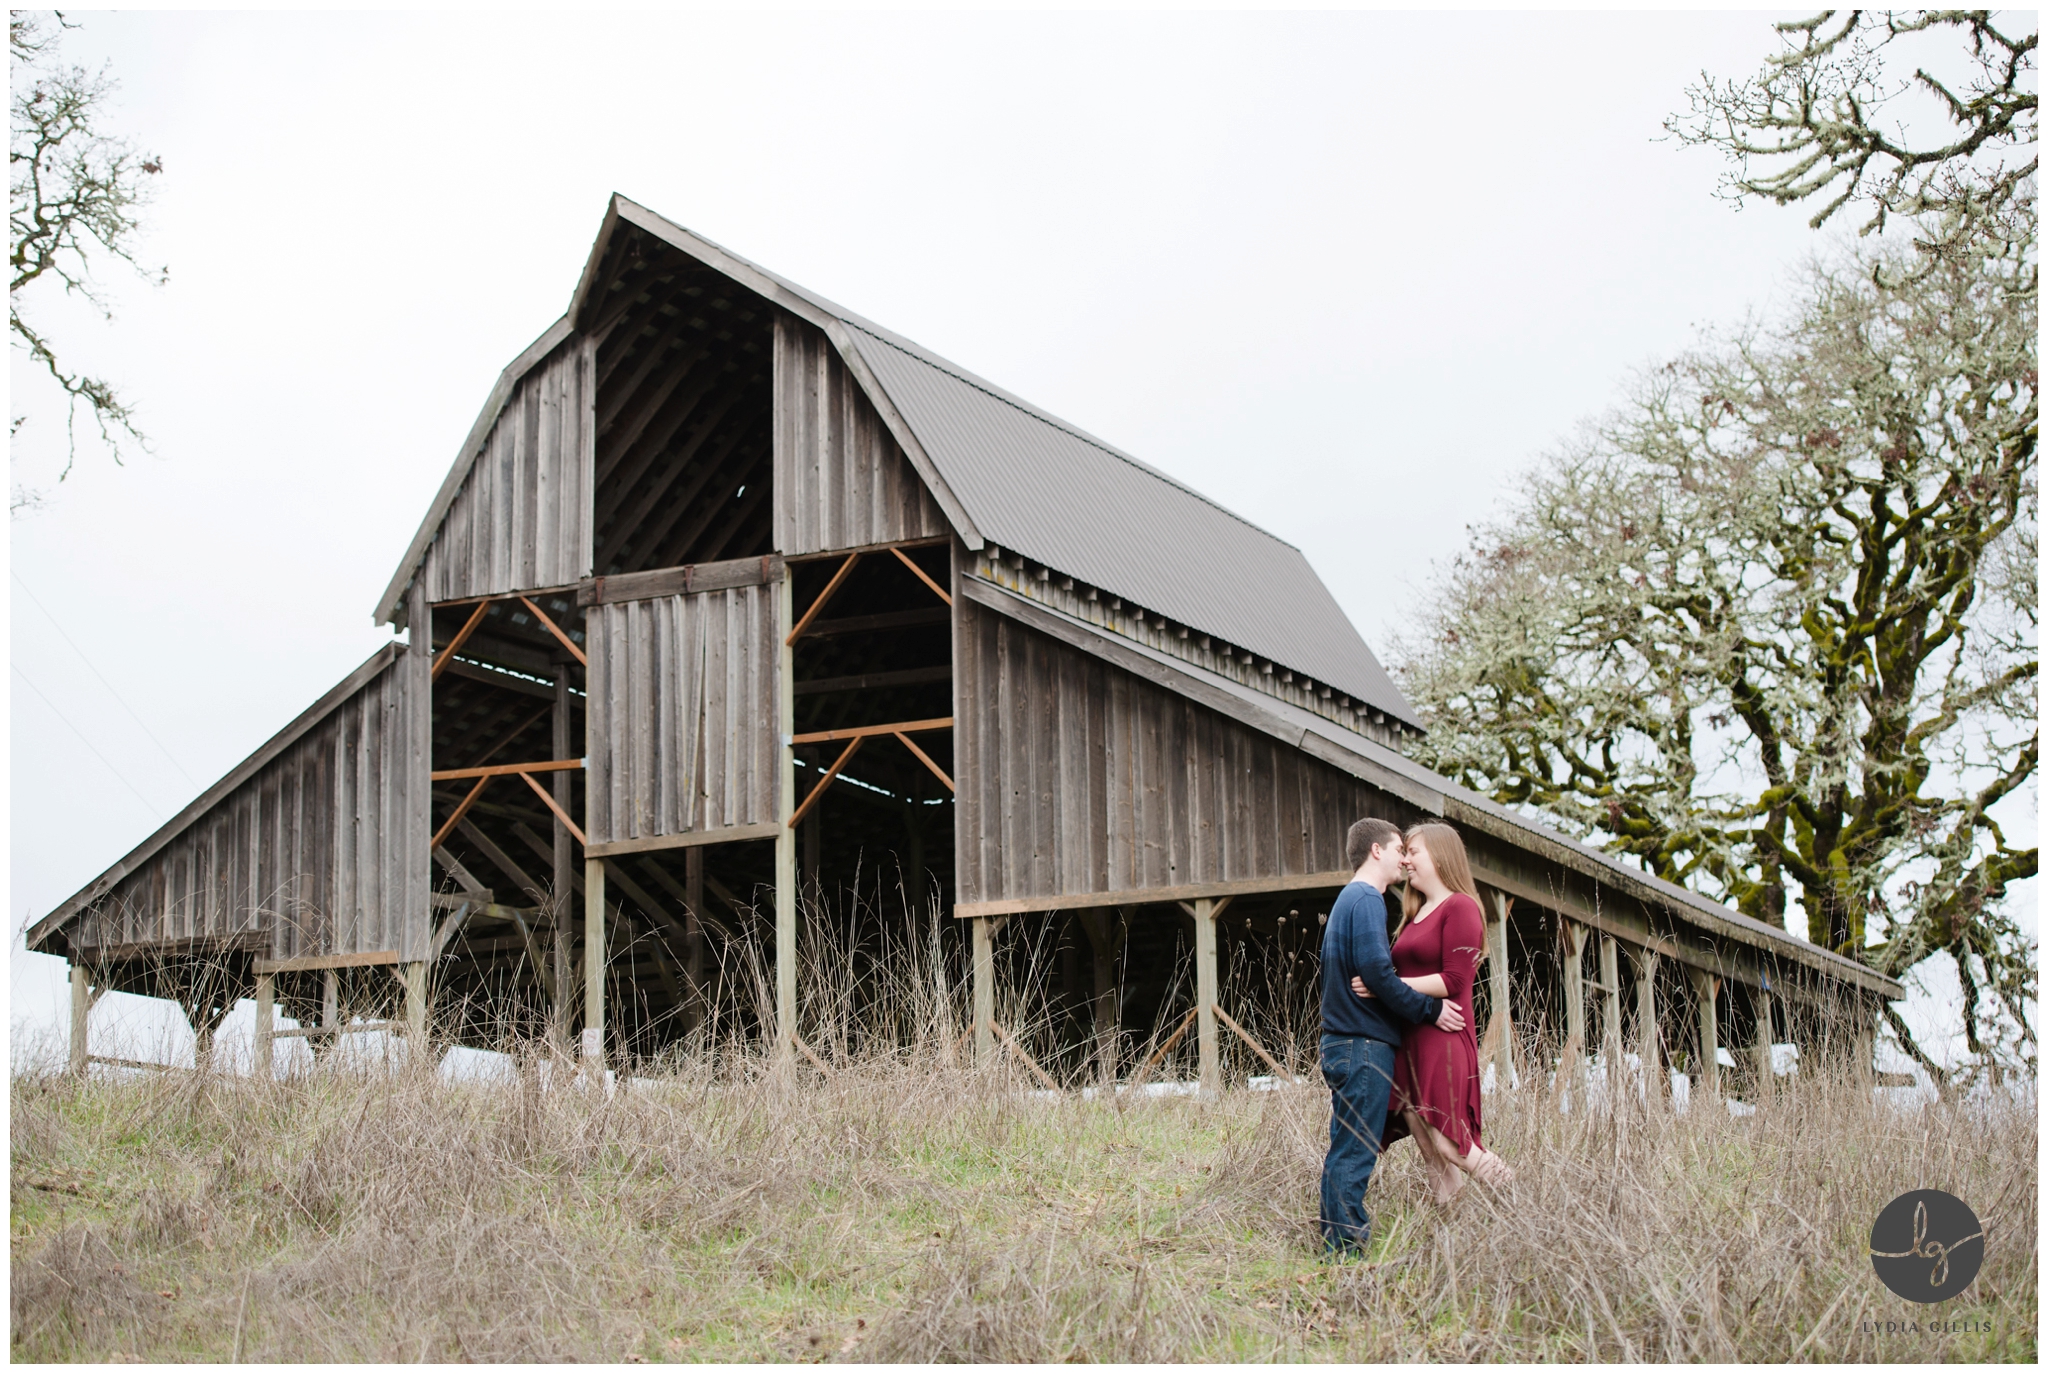 Bald Hill engagement session | Lydia Gillis Photography 